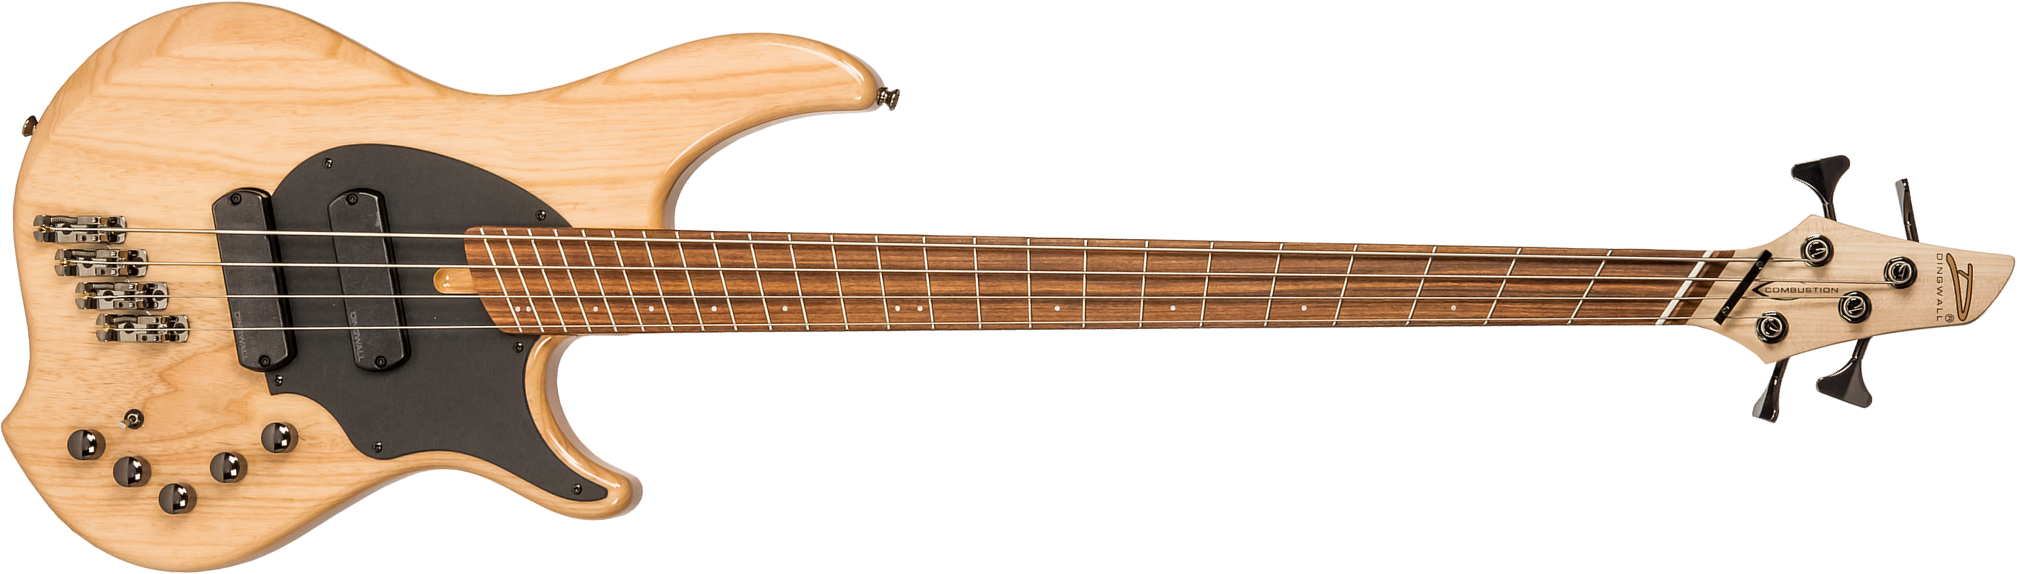 Dingwall Combustion Cb2 4c 2pu Active Pf - Natural - Solidbody E-bass - Main picture